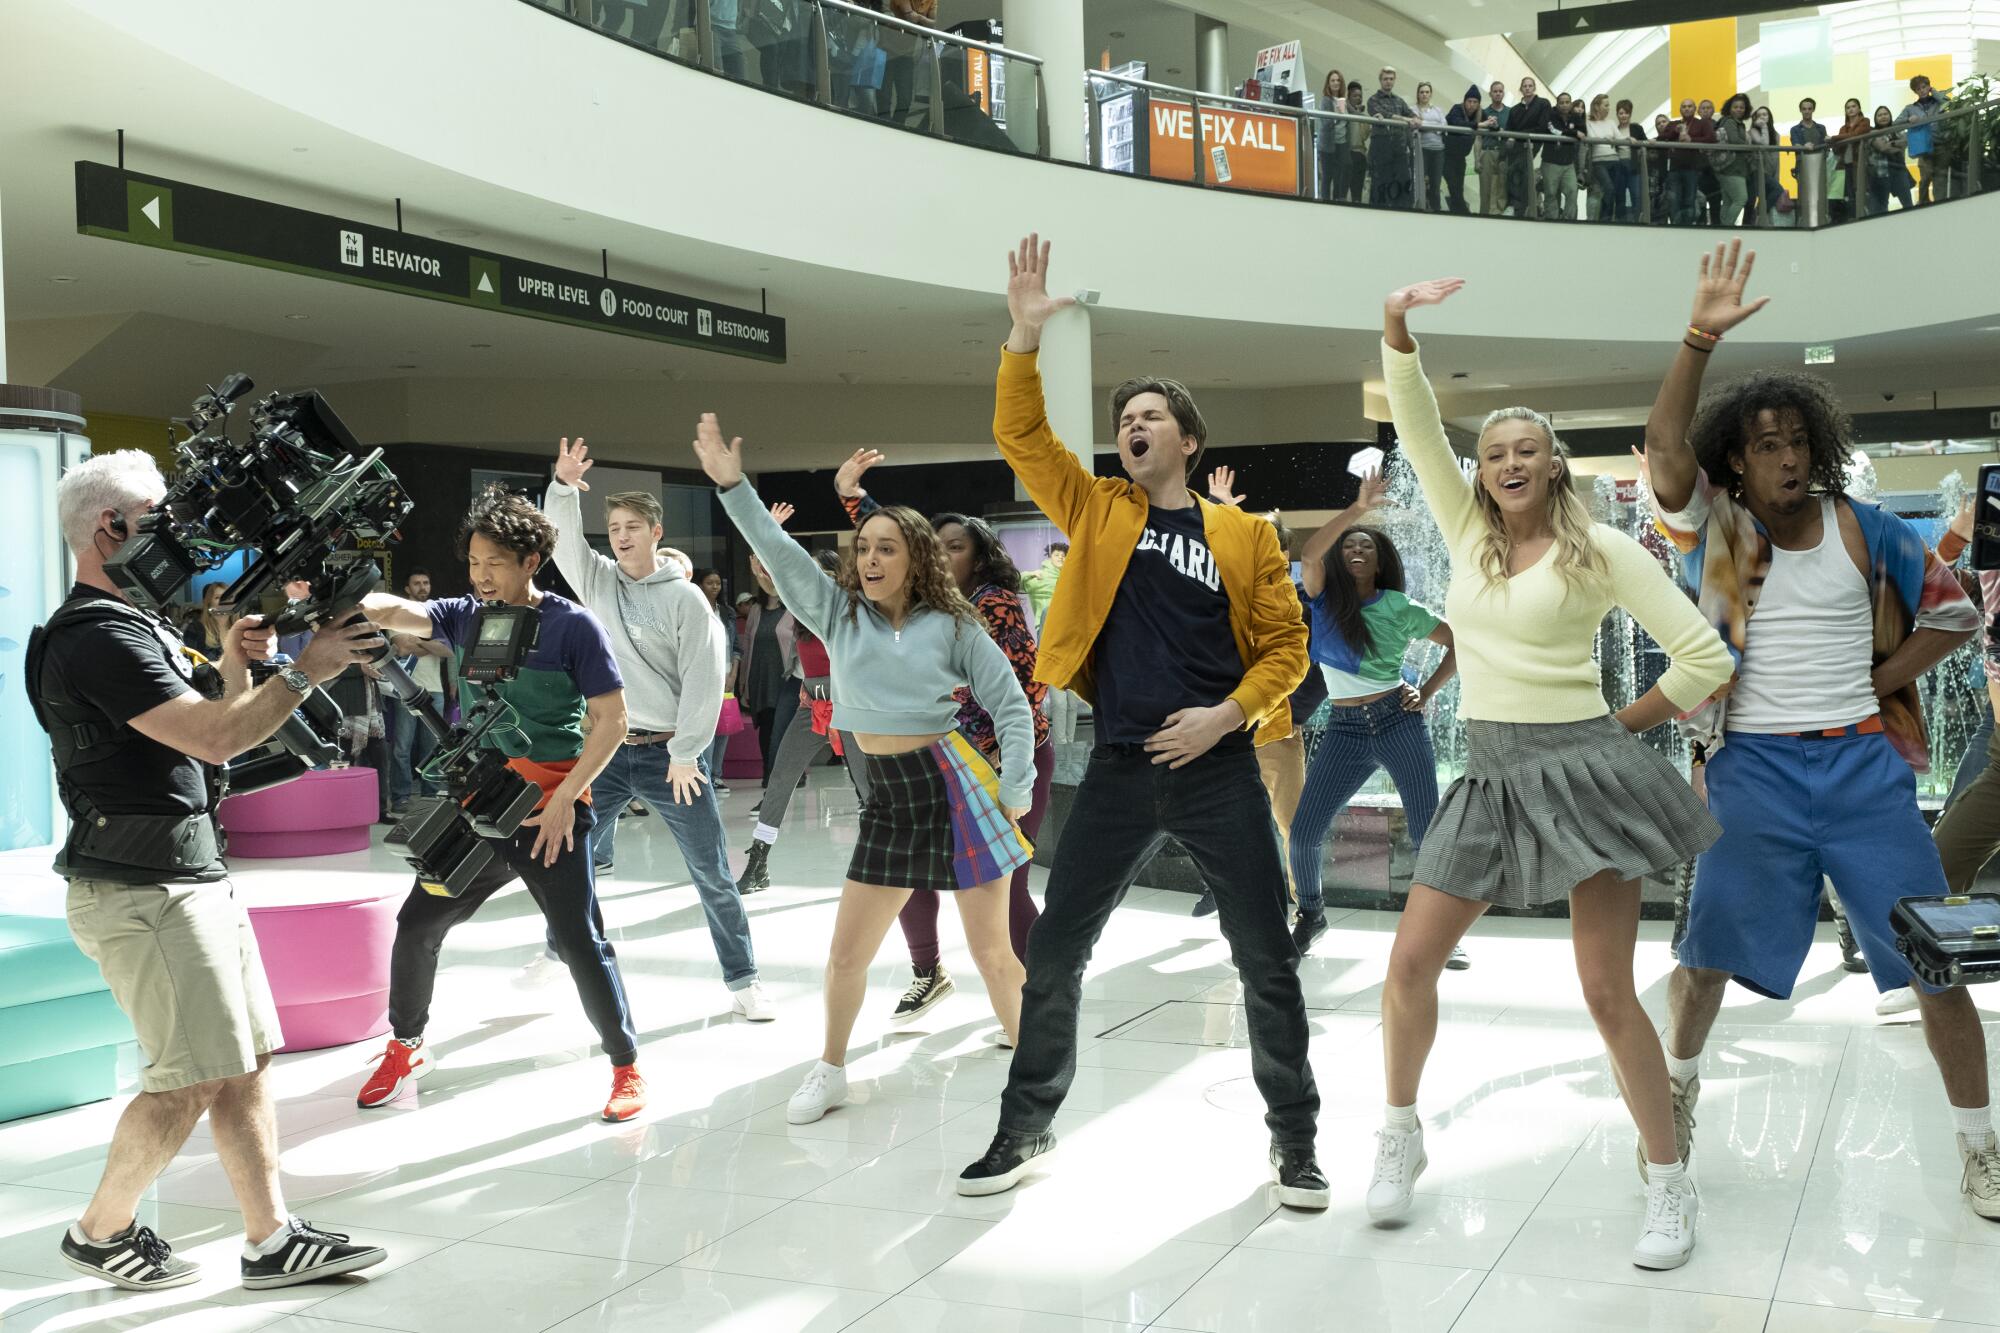 Andrew Rannells and fellow dancers perform "Love Thy Neighbor" in a mall courtyard for the Netflix movie "The Prom."